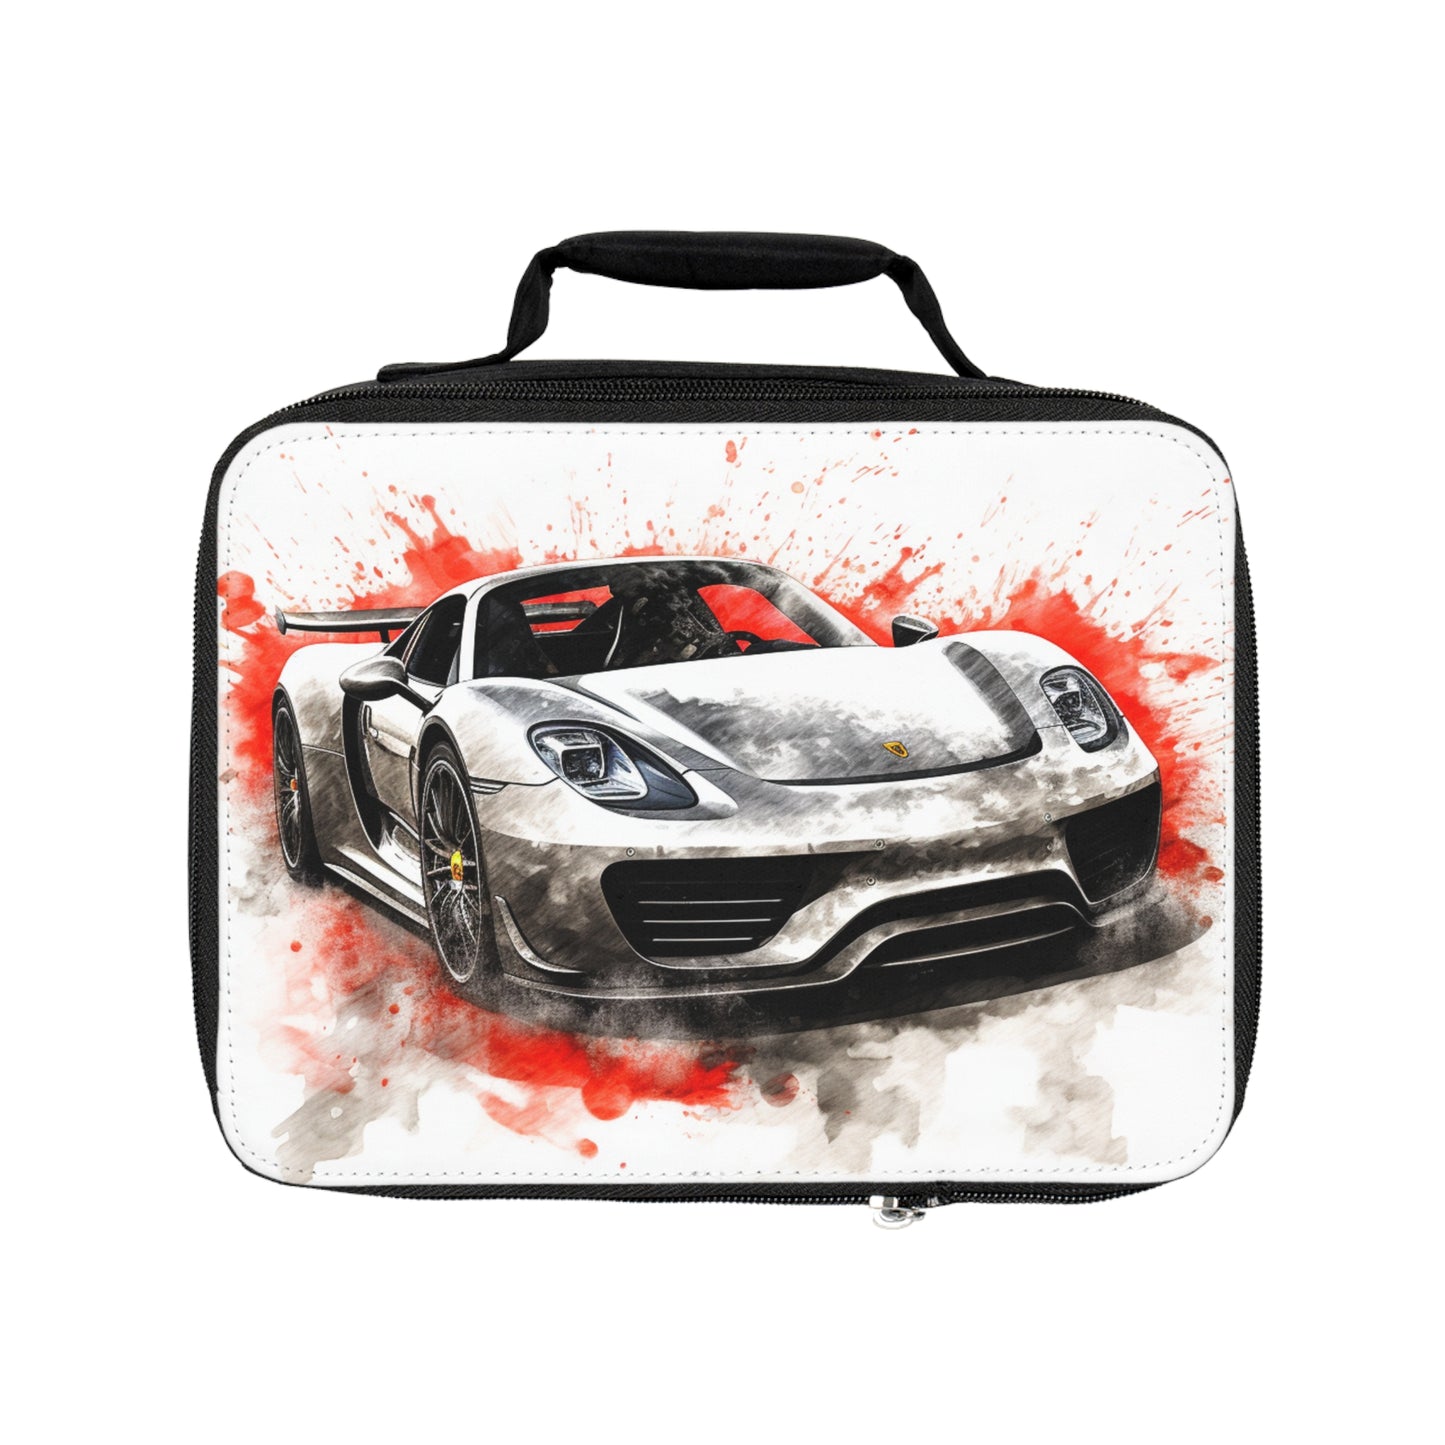 Lunch Bag 918 Spyder white background driving fast with water splashing 4